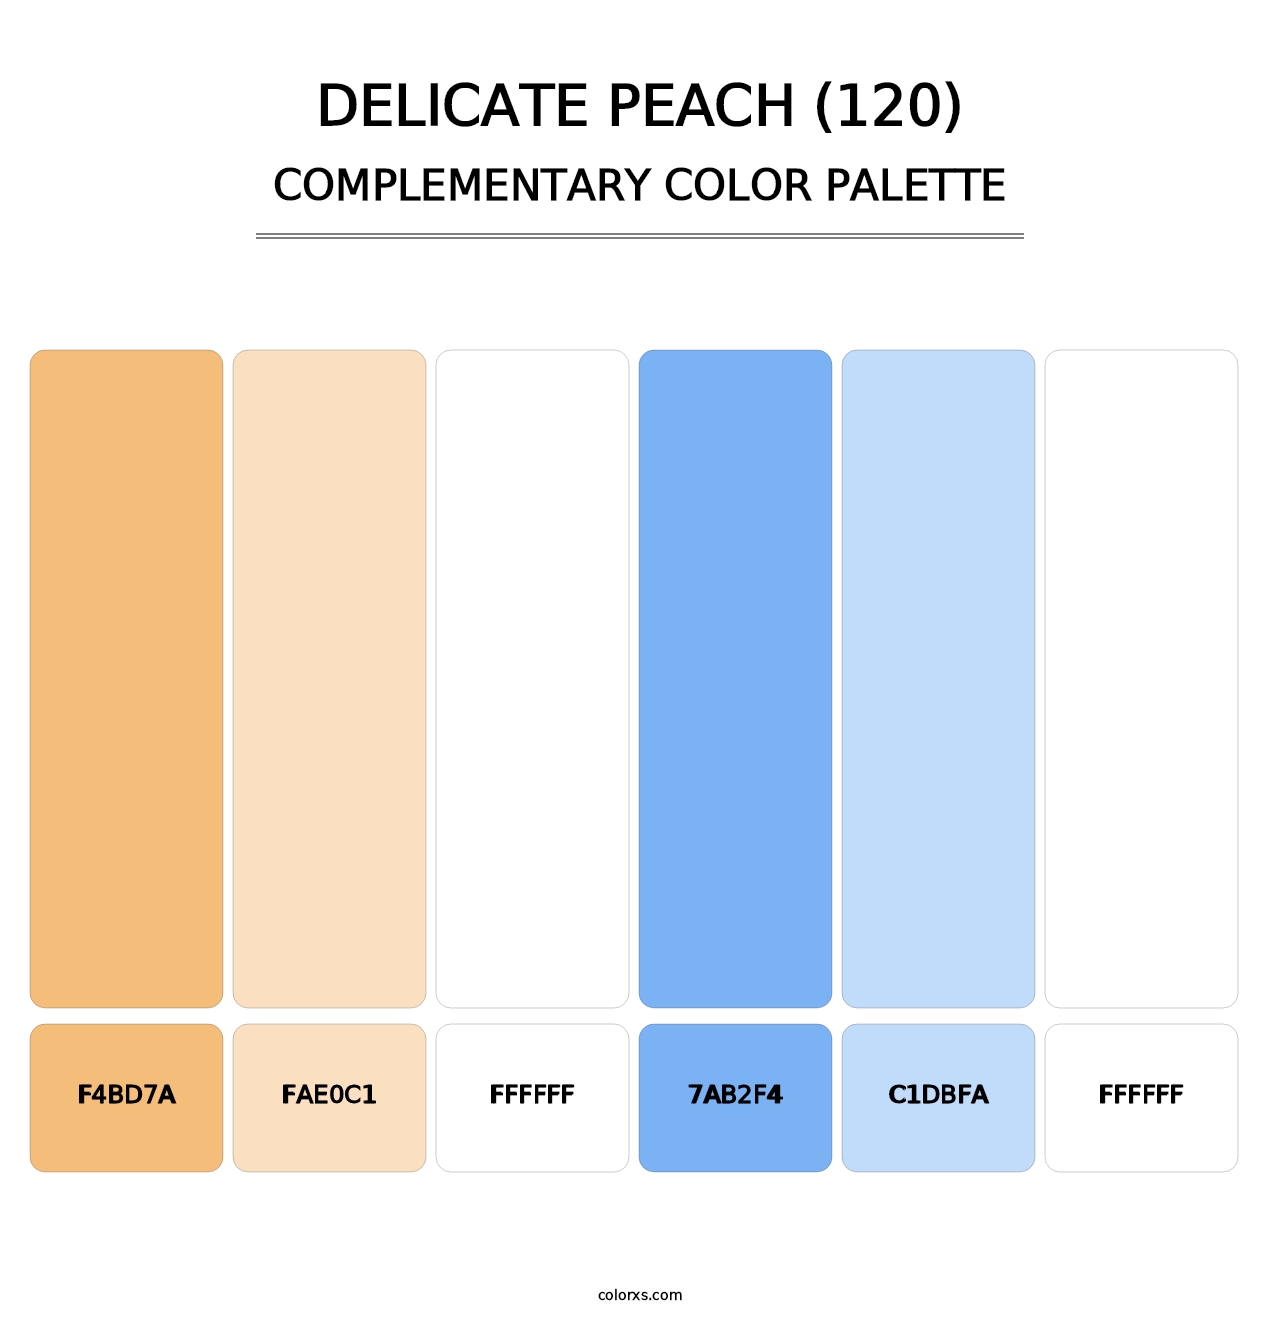 Delicate Peach (120) - Complementary Color Palette